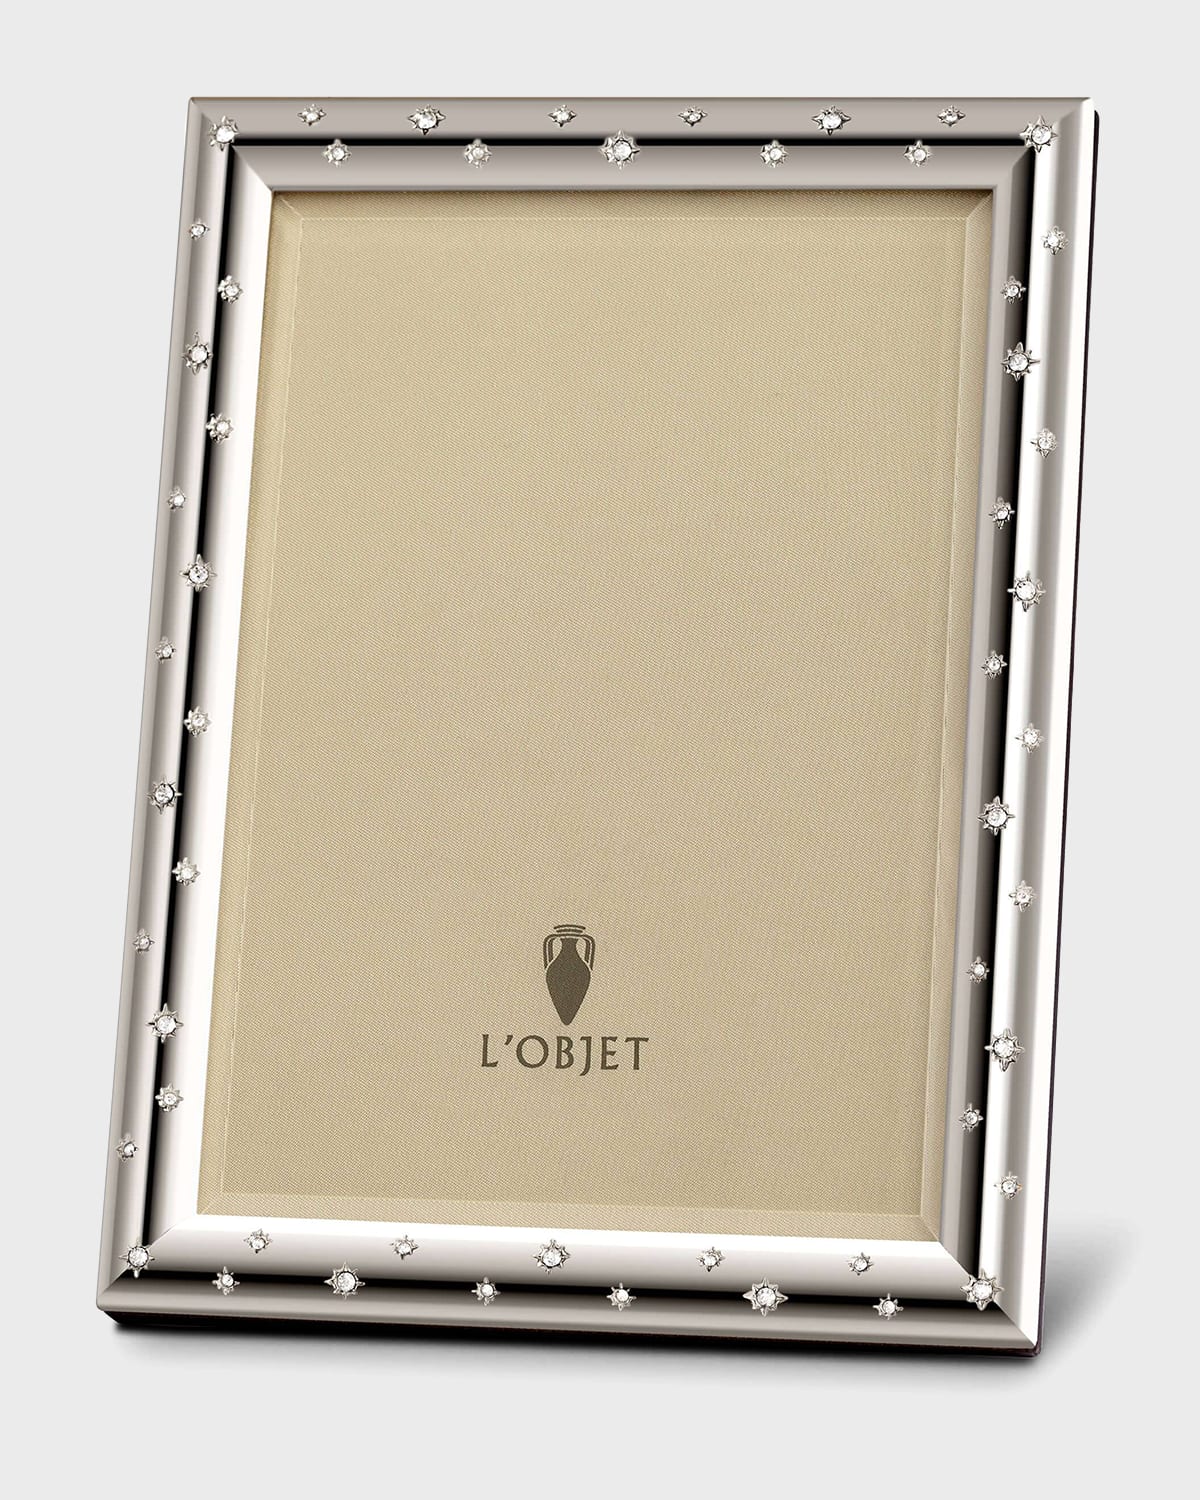 New Little Baby Brother Satin silver photo frame-shudehill Giftware 73530 